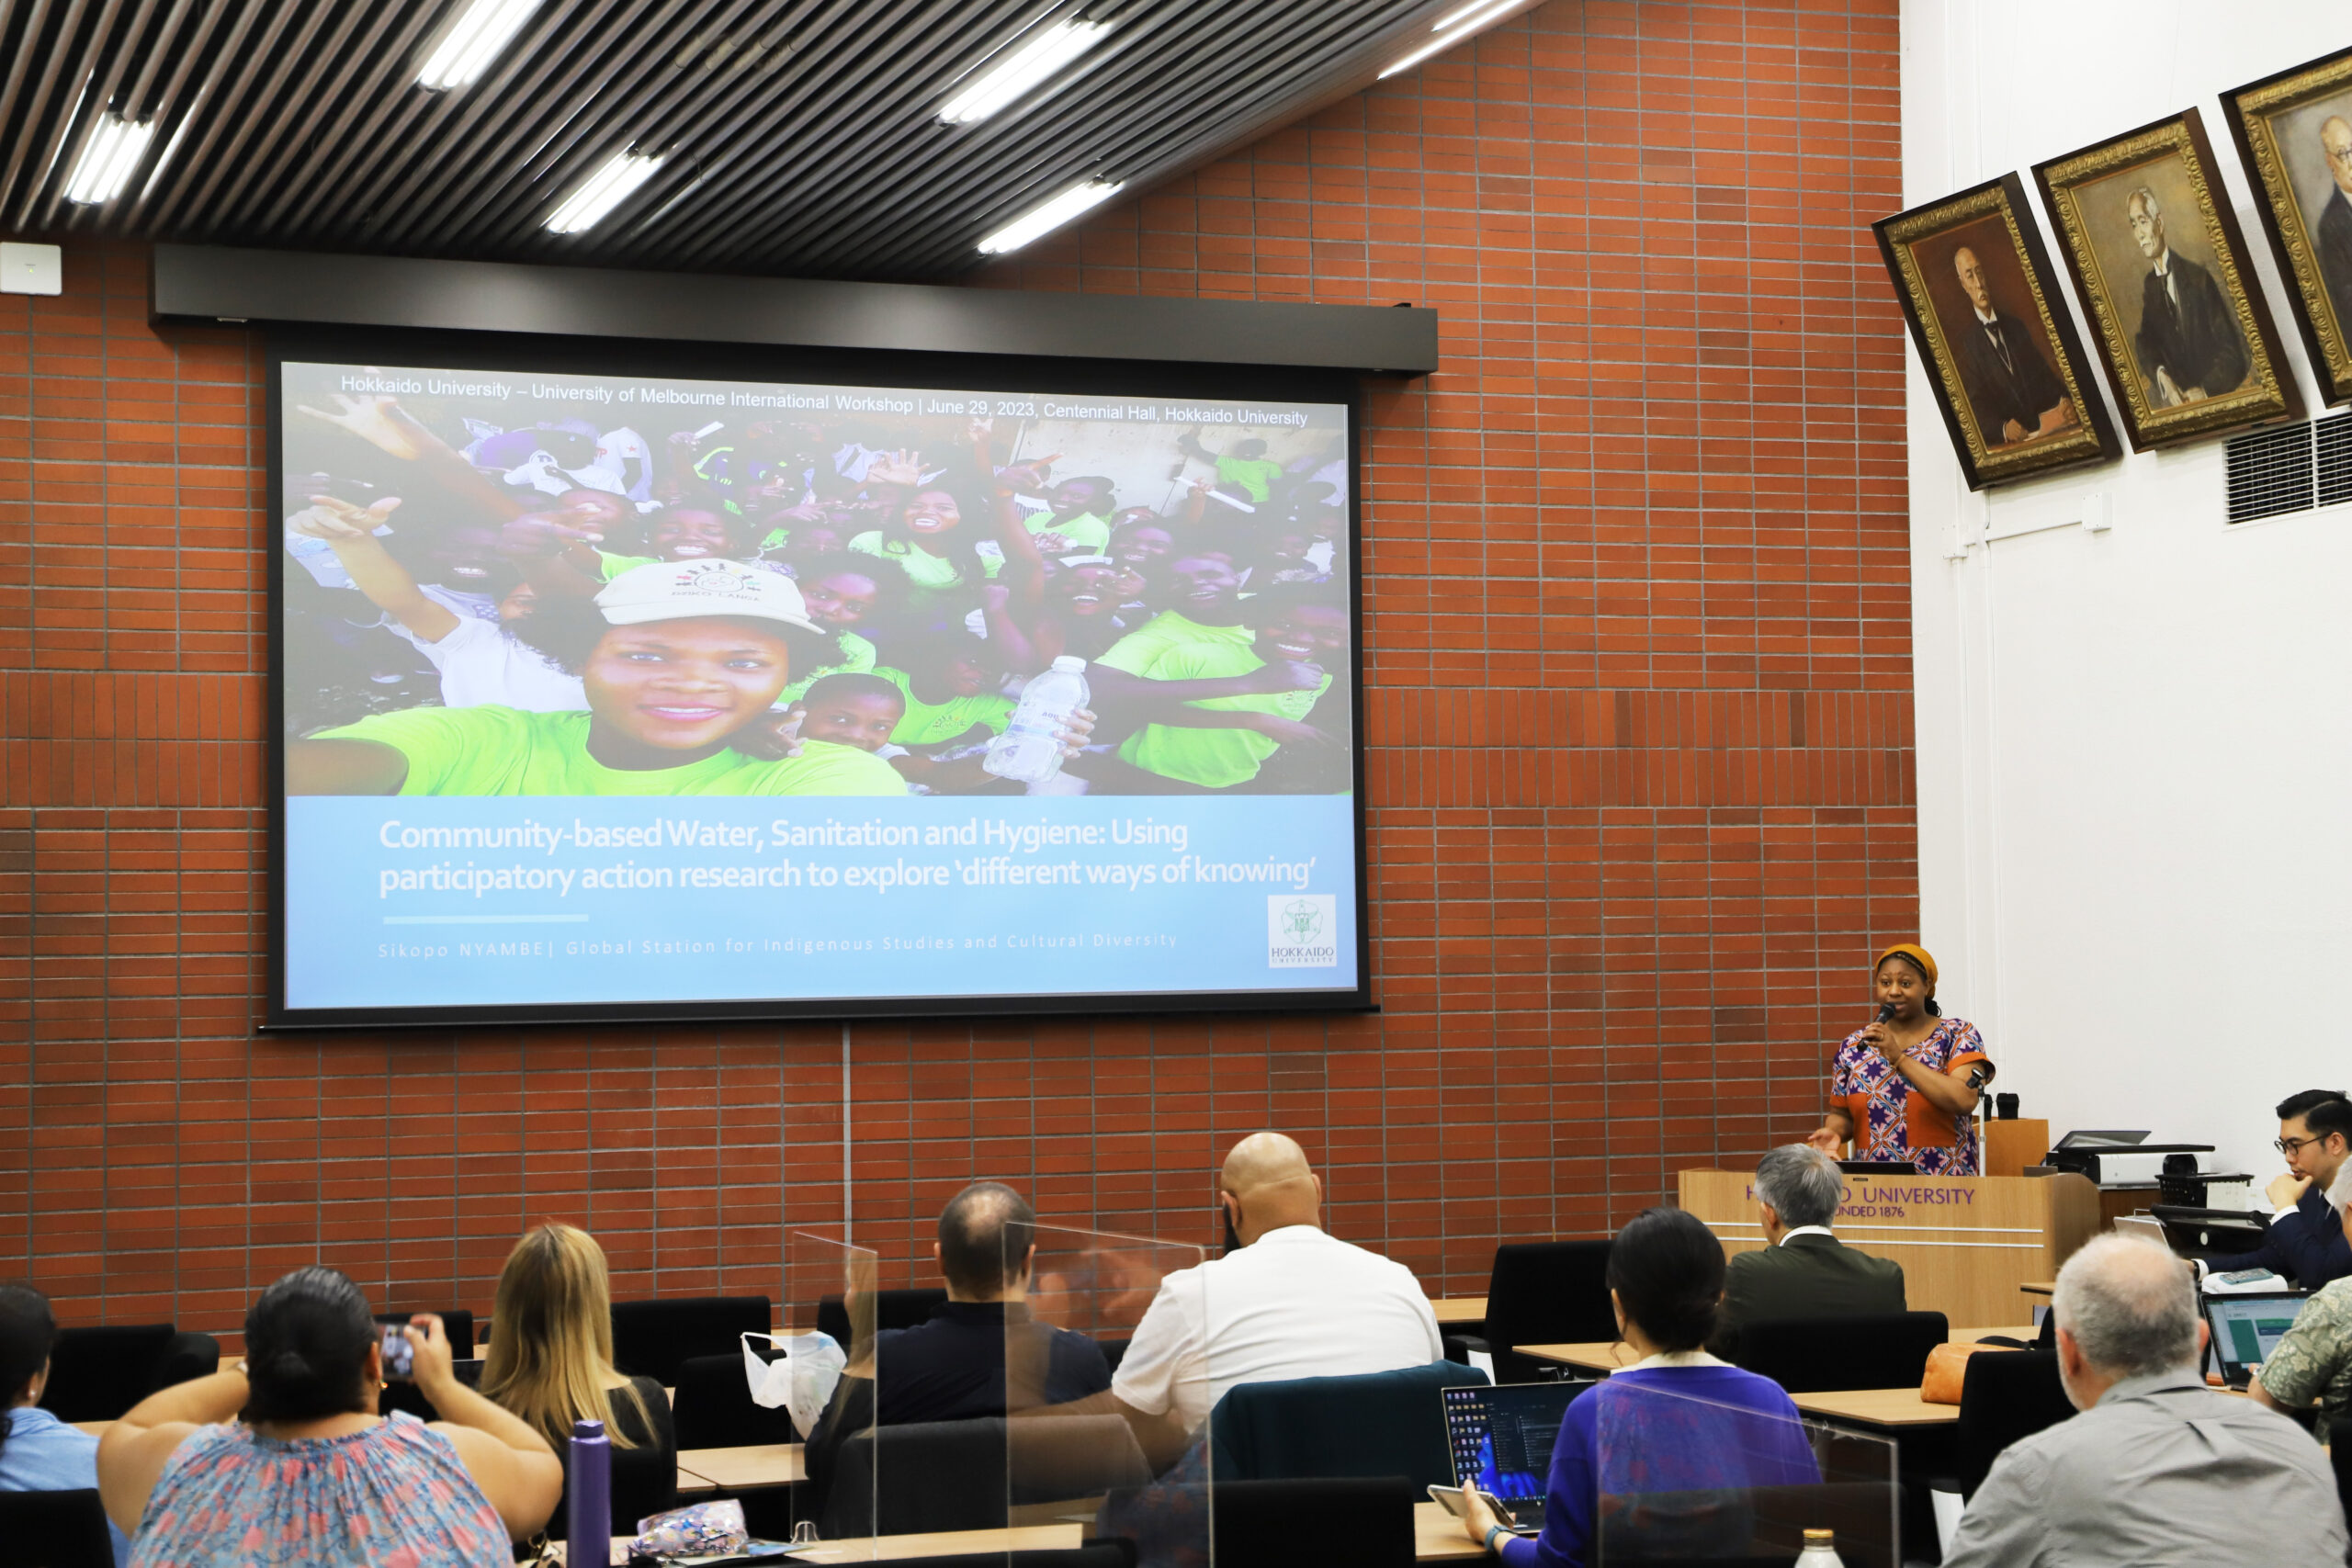 Assistant Professor Sikopo Nyambe speaking about her community-based hygiene practices research in the peri-urban communities in Lusaka, Zambia.